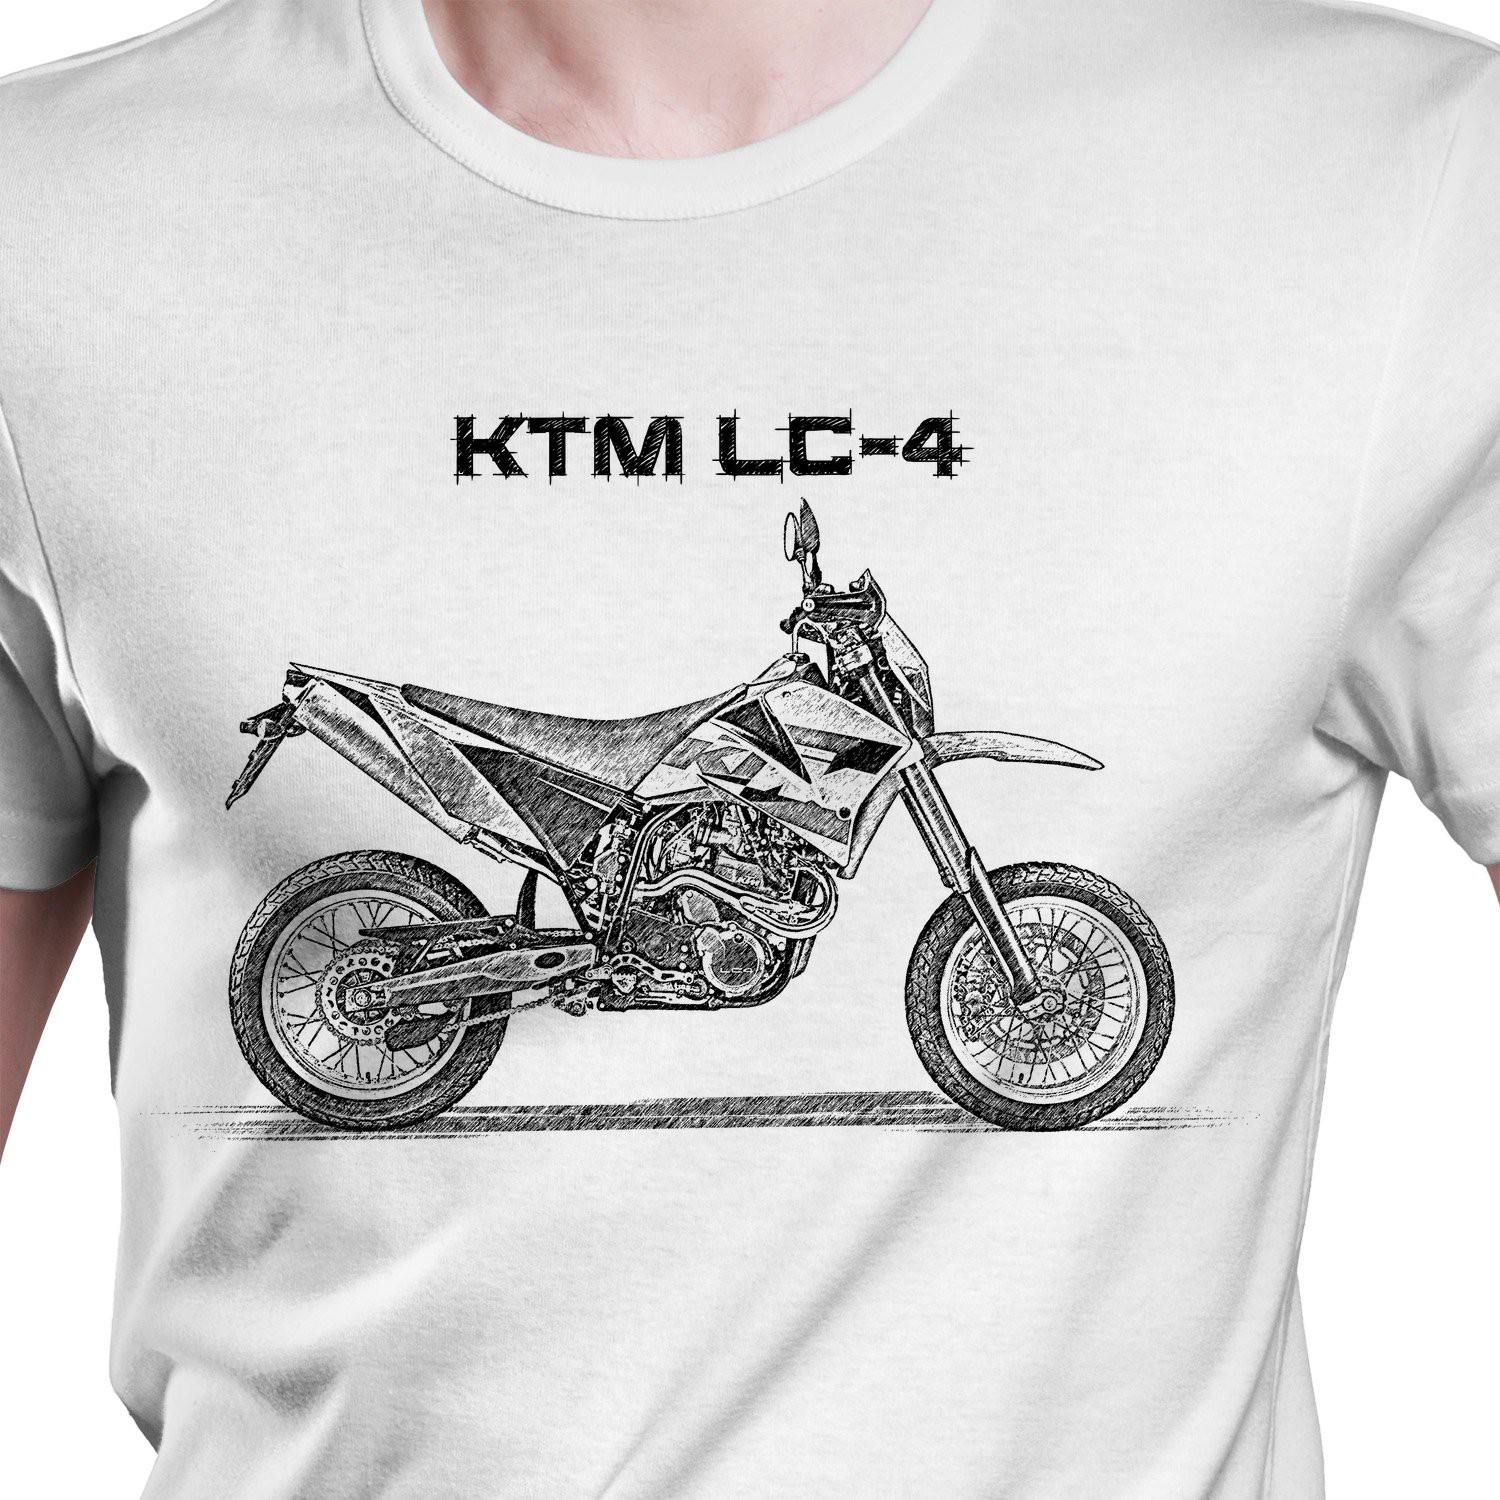 White T-shirt with KTM LC-4. Gift for motorcyclist.